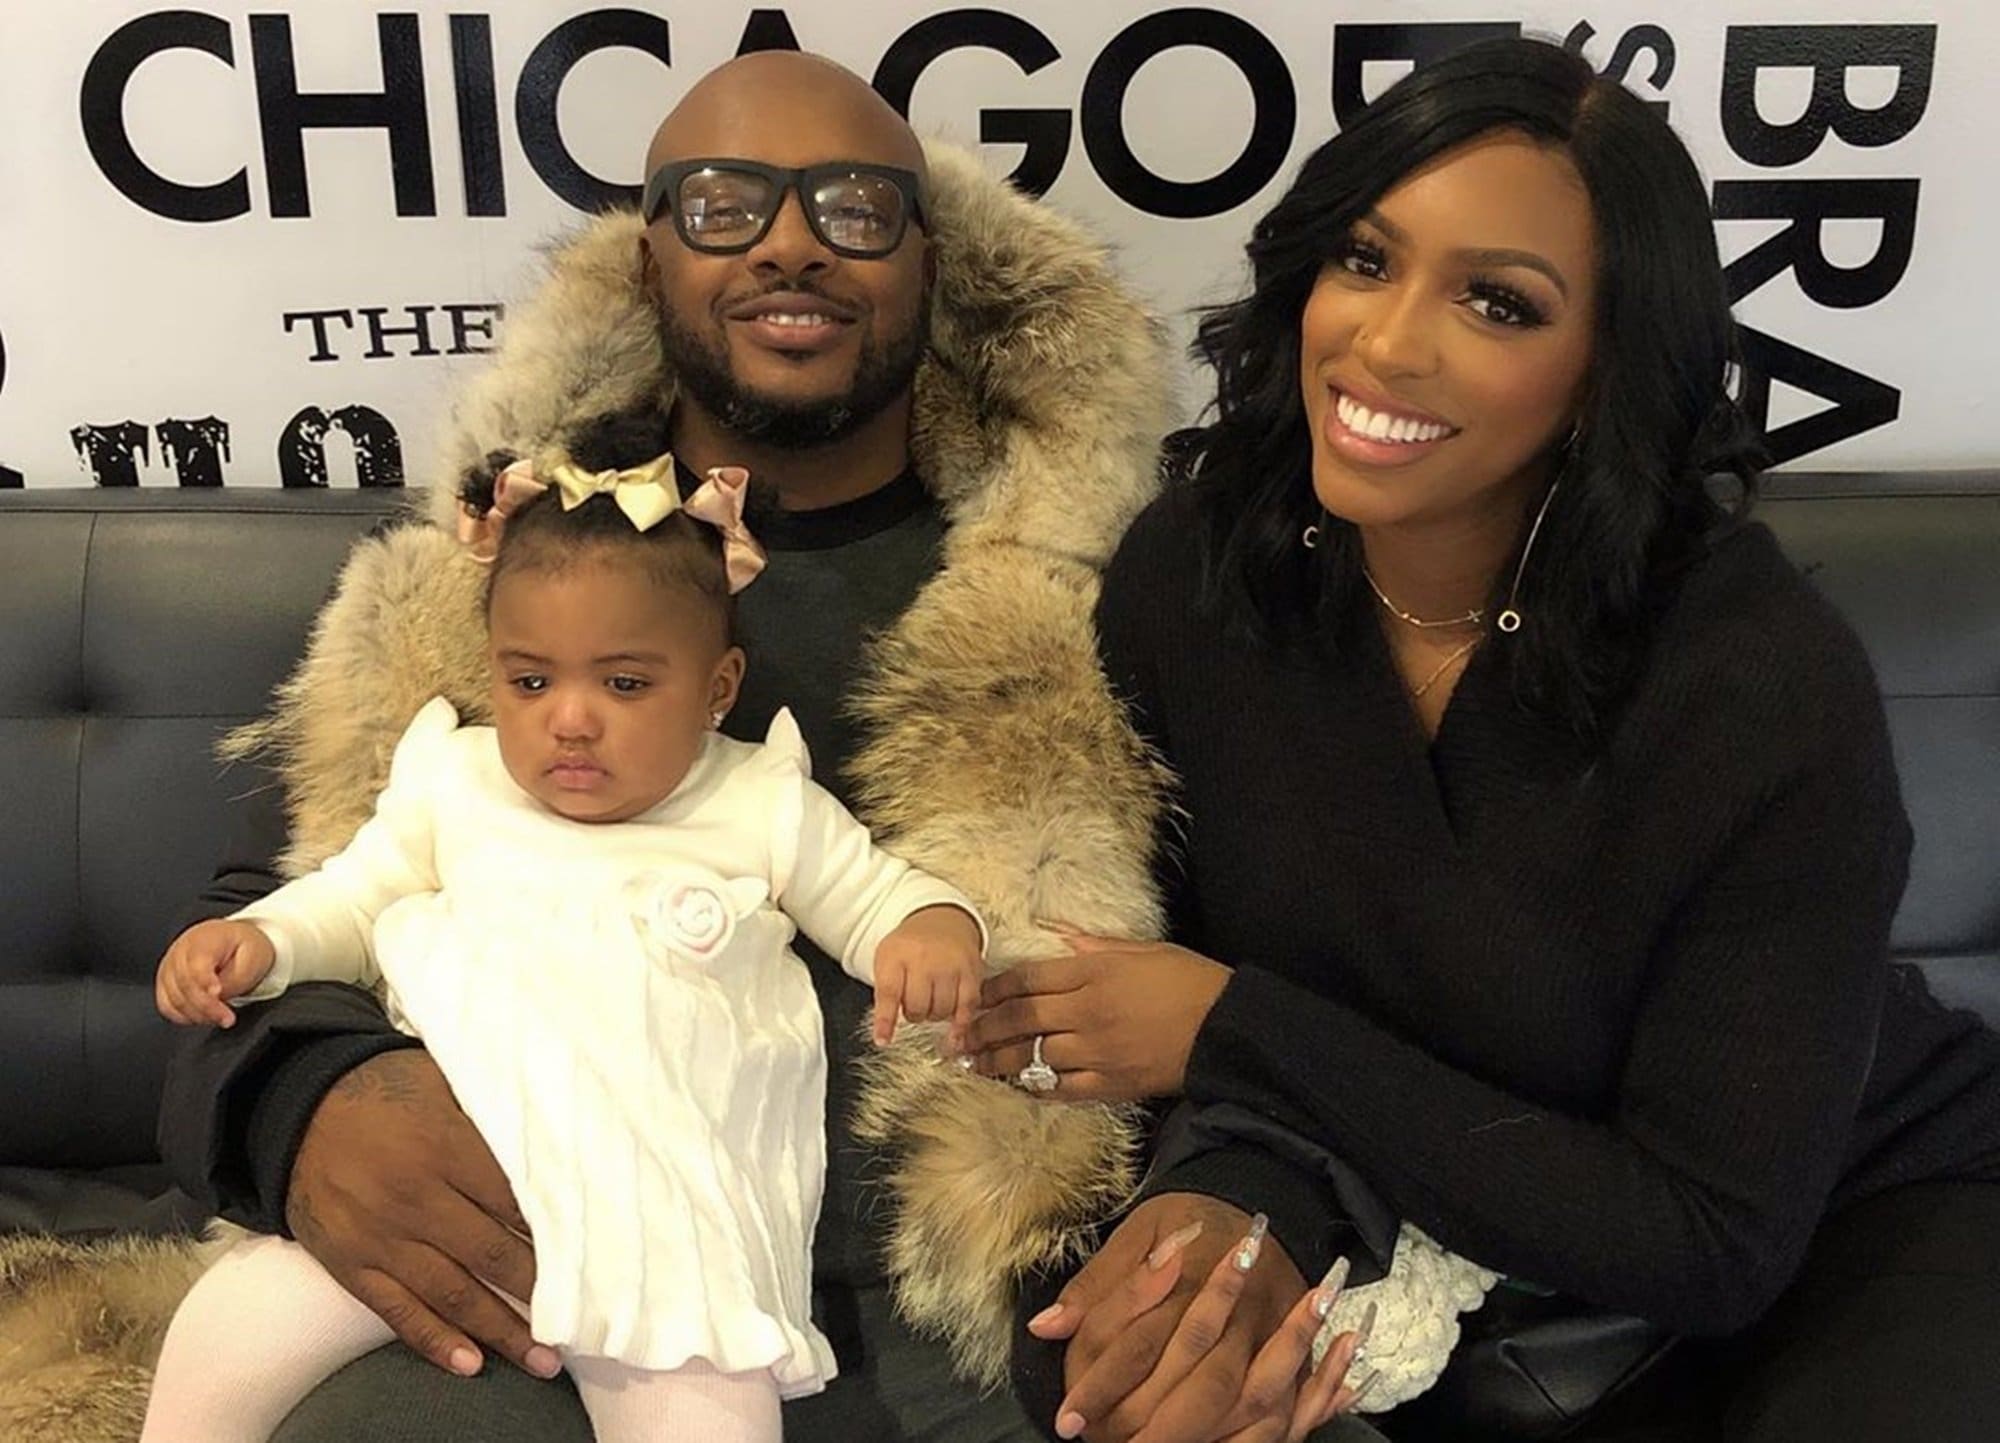 Porsha Williams' Photos With Her Family Have Fans In Awe